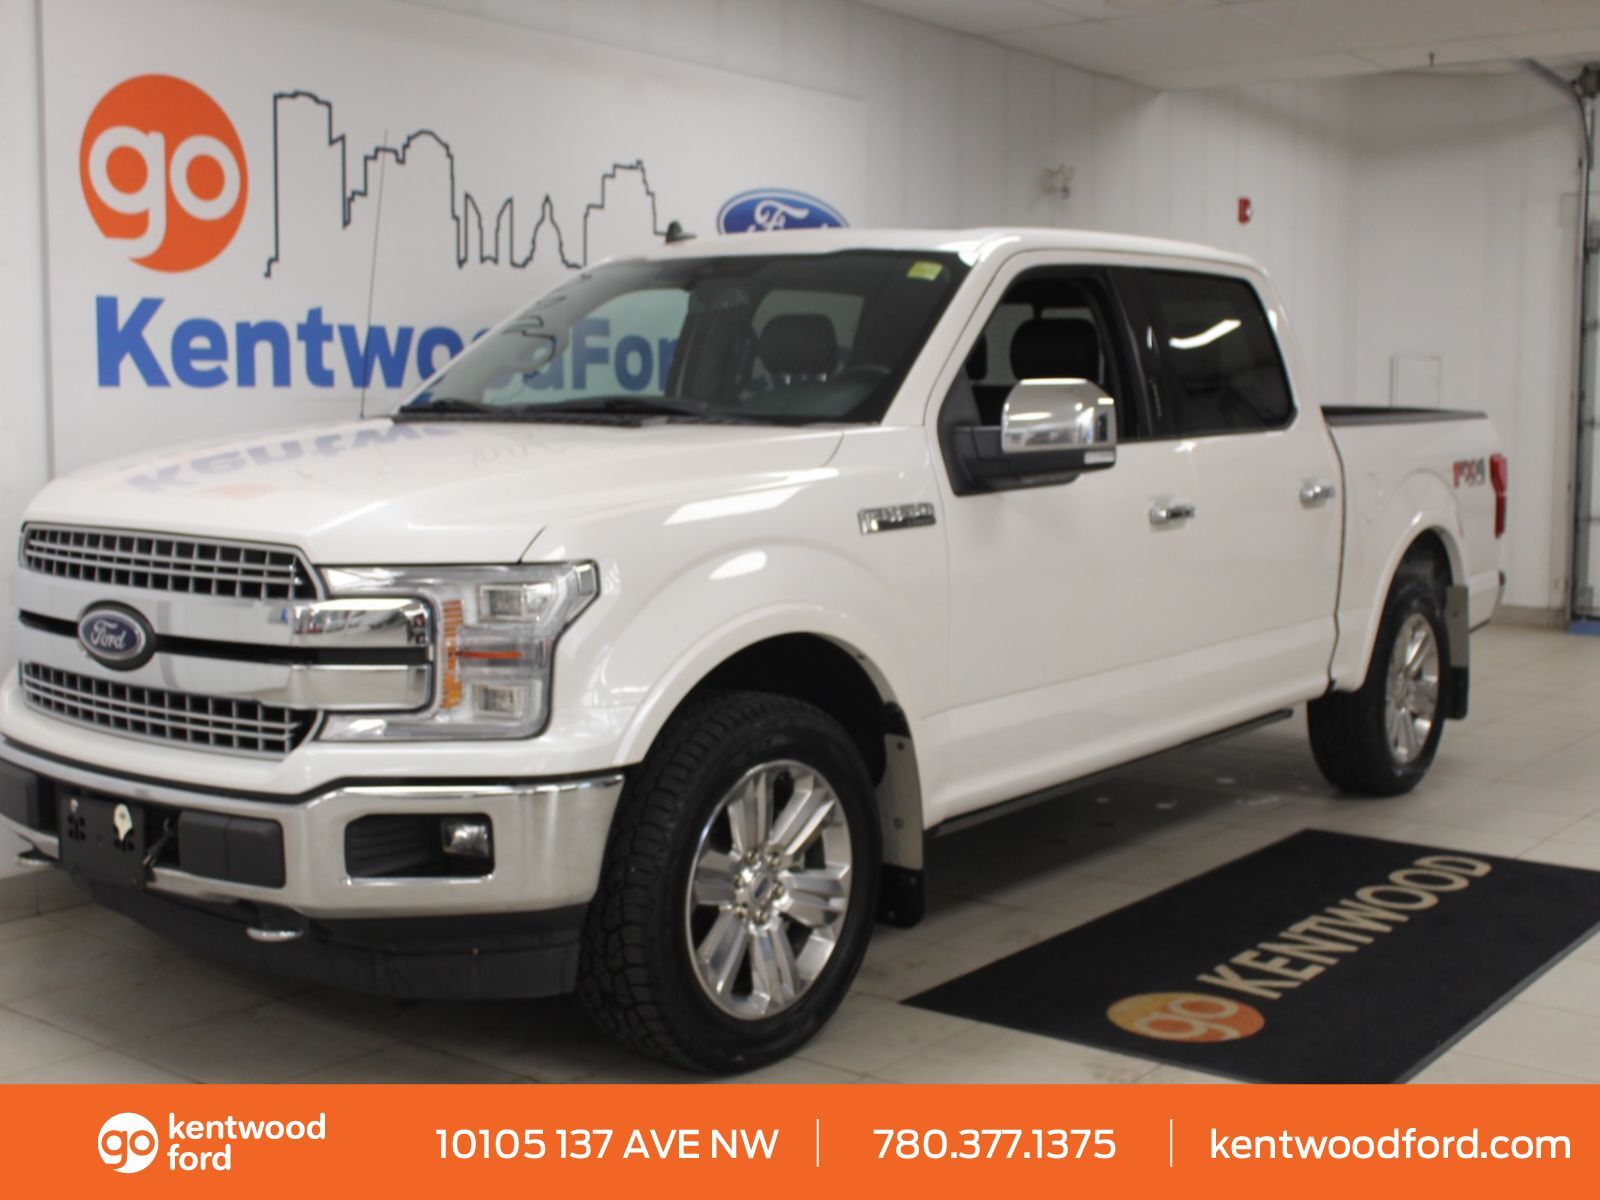 2019 Ford F-150 Lariat | 502a | Tailgate Step | Moonroof | 20s | P